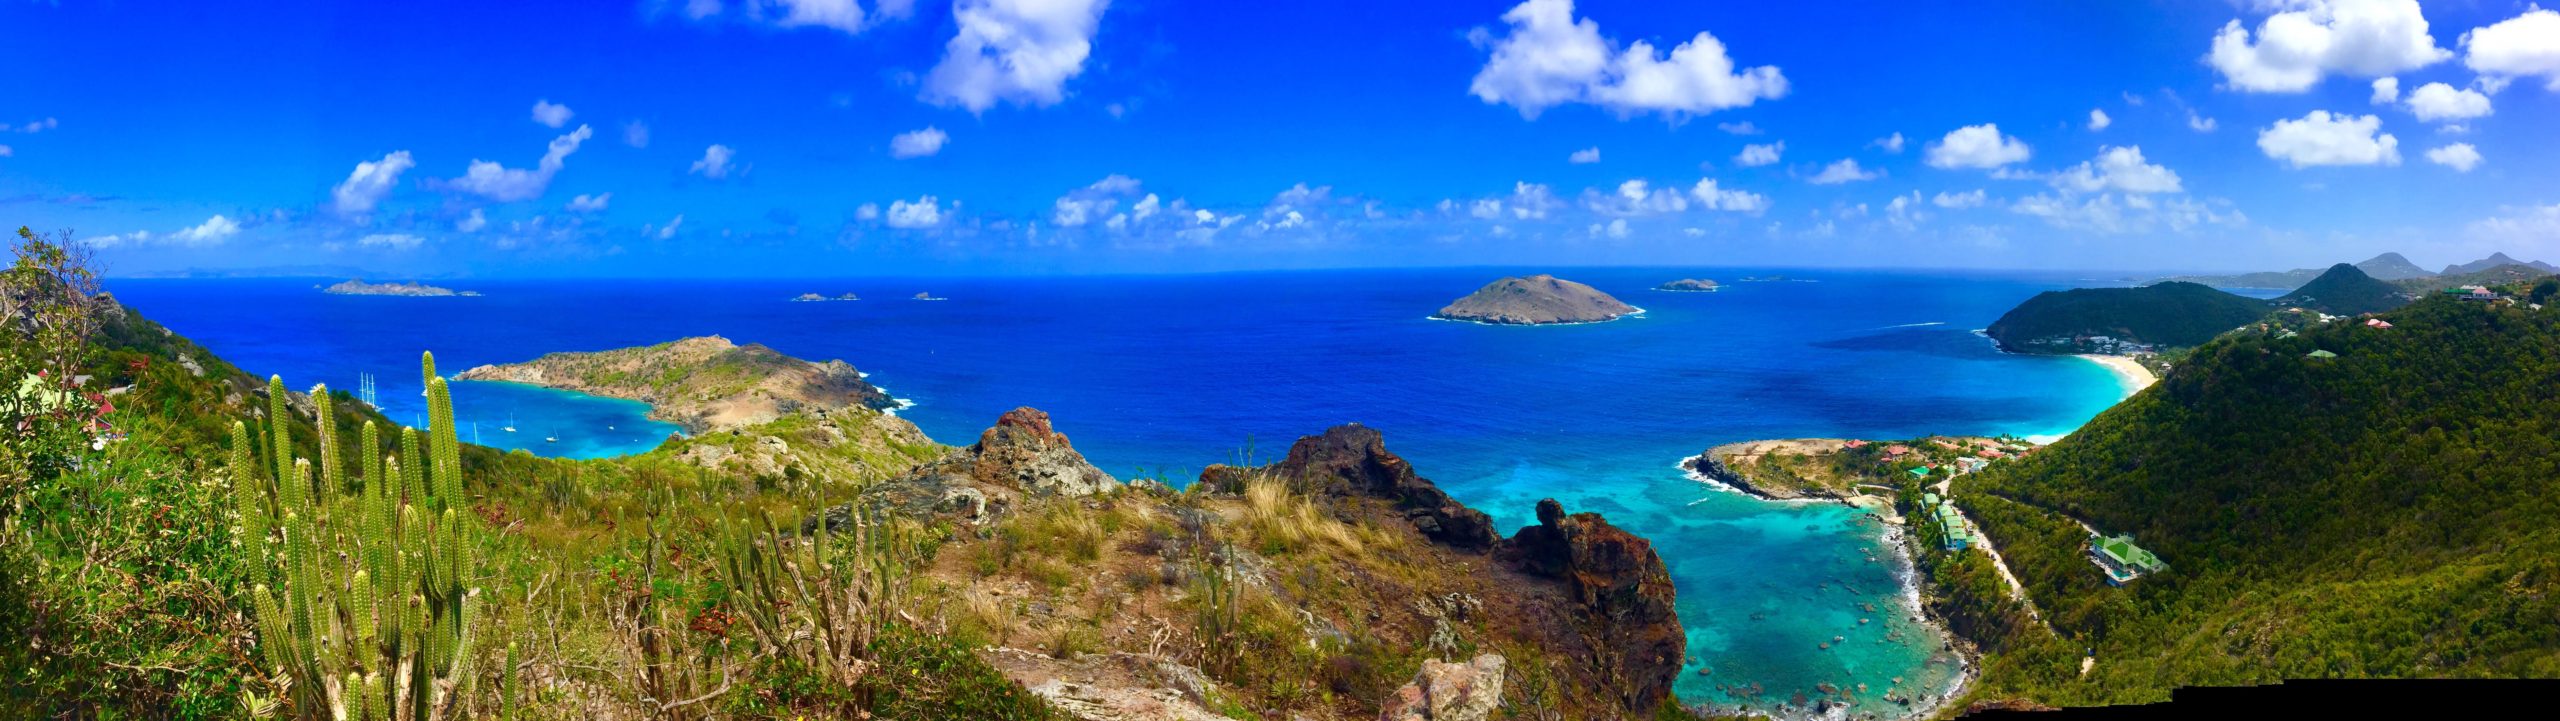 Bringing Children To St Barts  SBHonline St Barts Vacations Insiders Guide